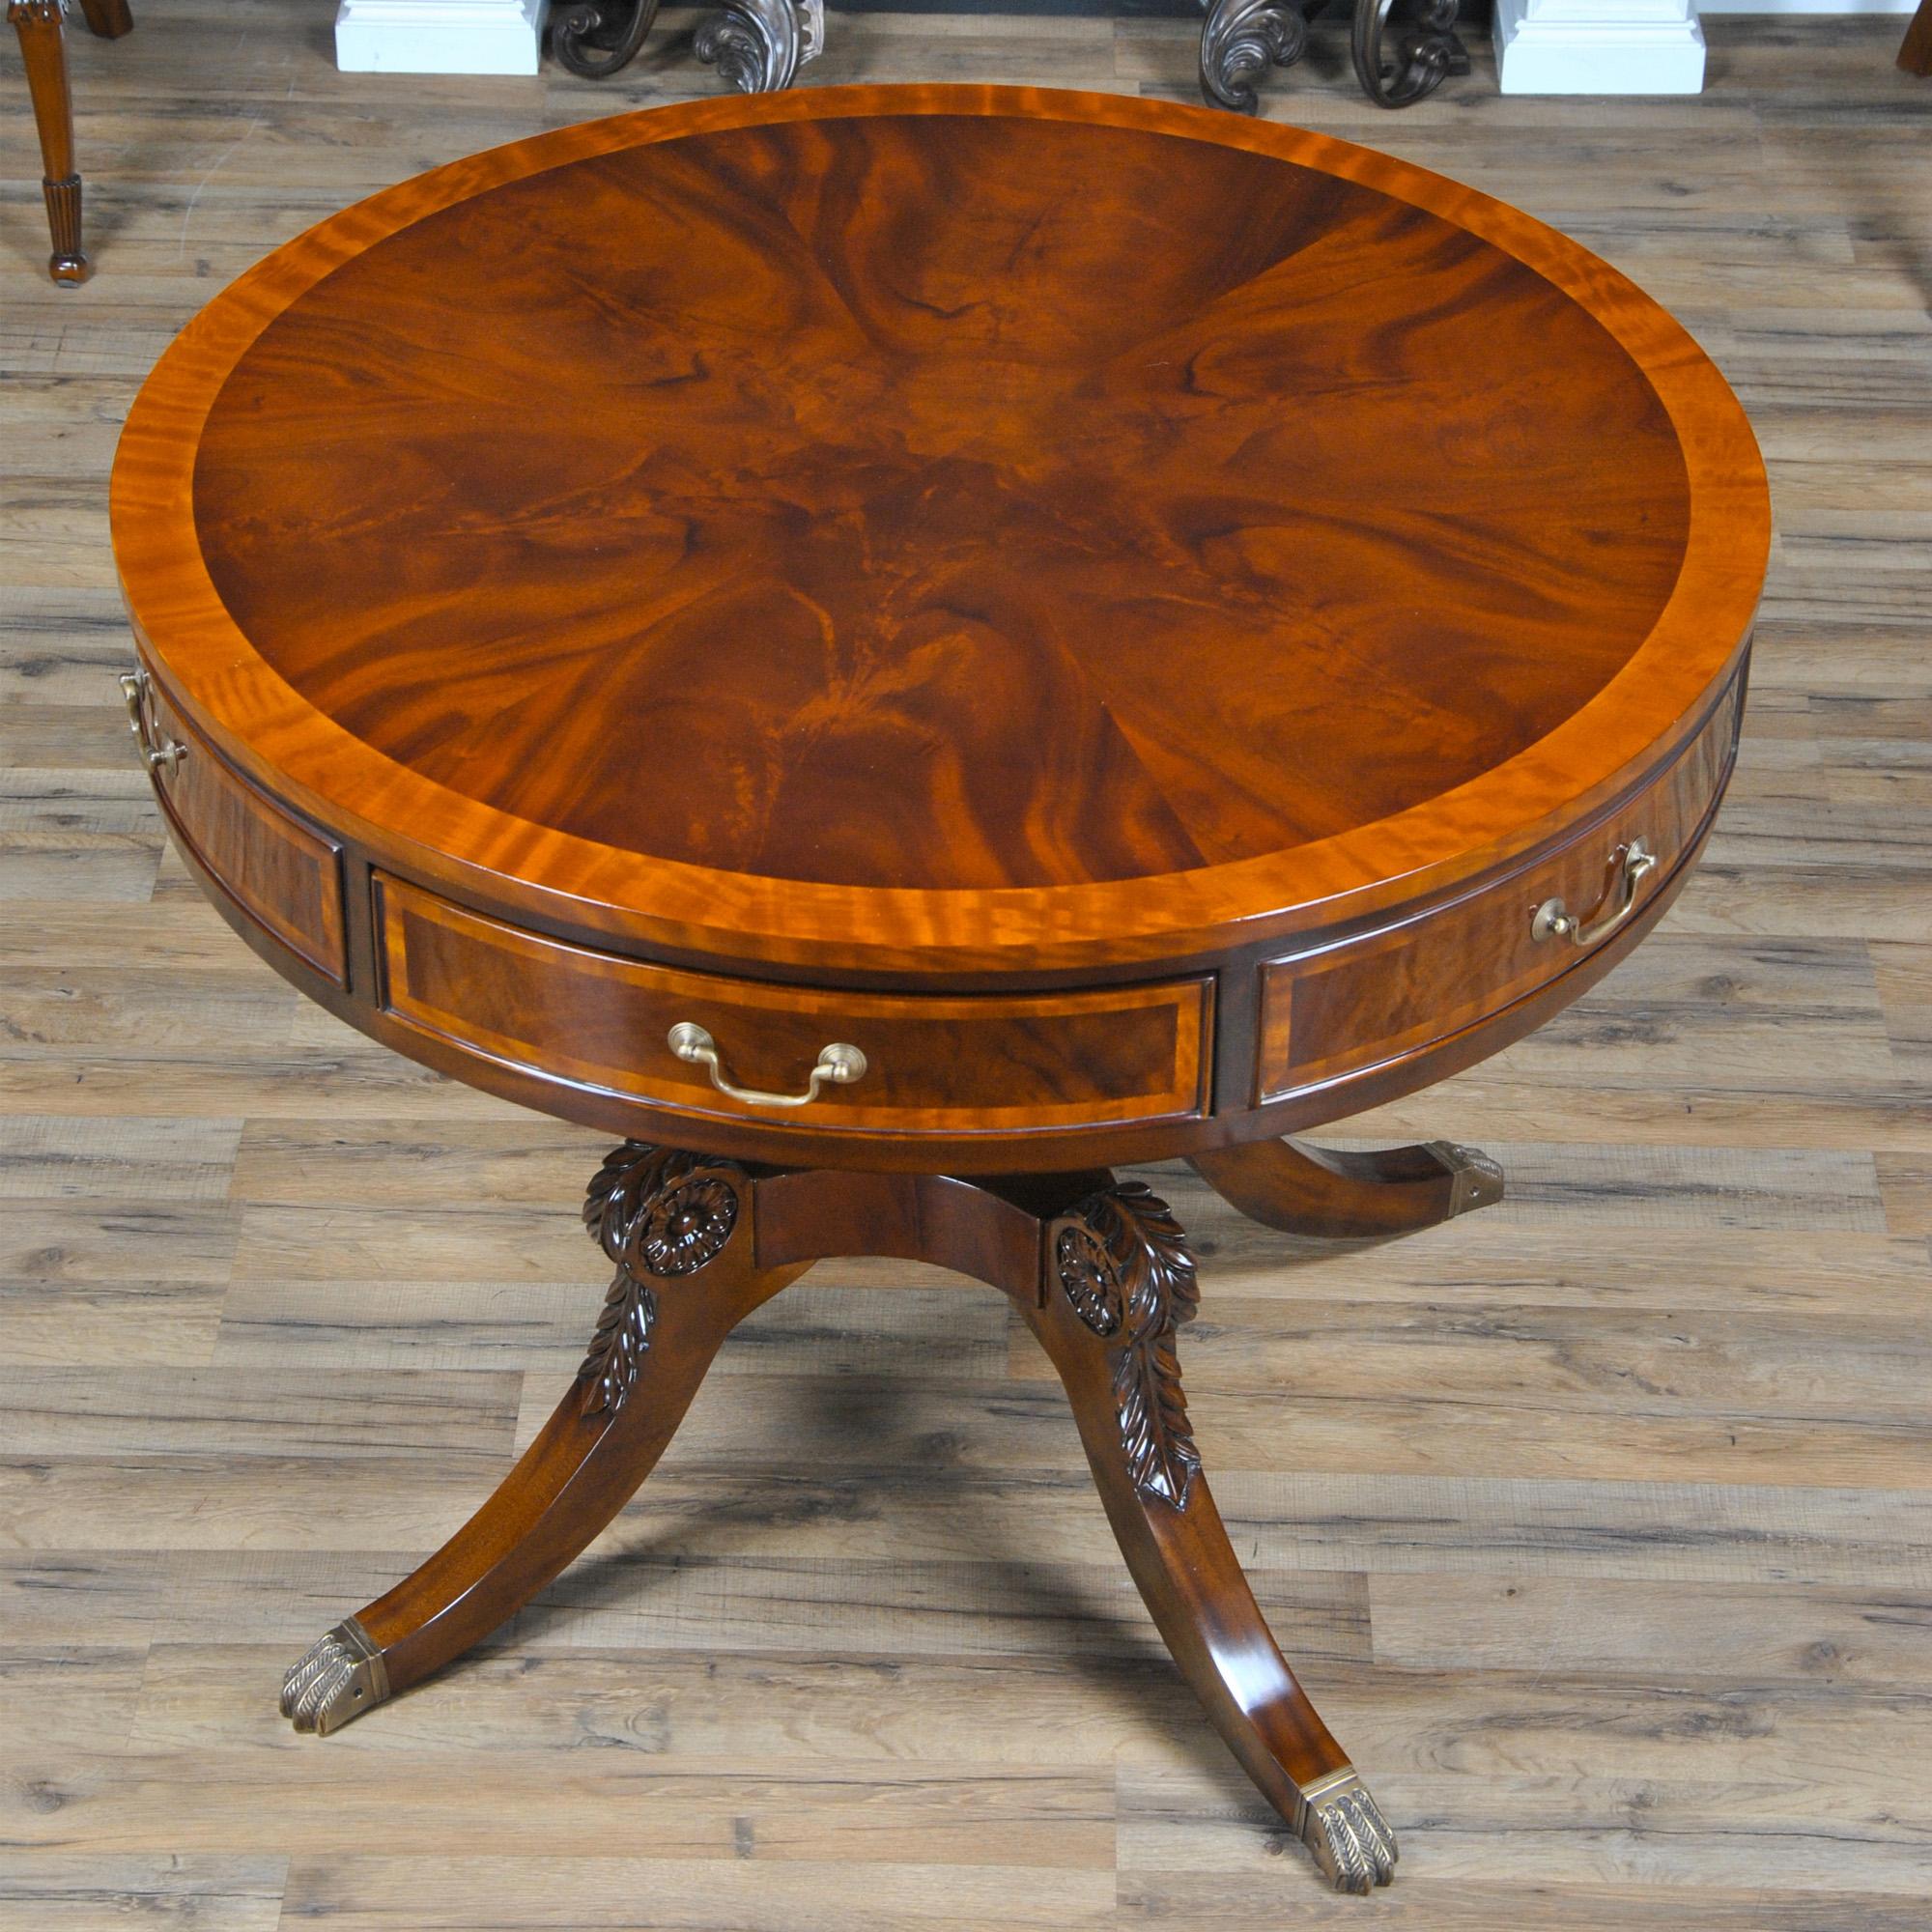 Our most robust drum table this large Round Center Table has eye catching appeal with satin wood banding, carved knees and a thick top with three dovetailed drawers. Superb quality mahogany solids and mahogany and satinwood veneers combine to create